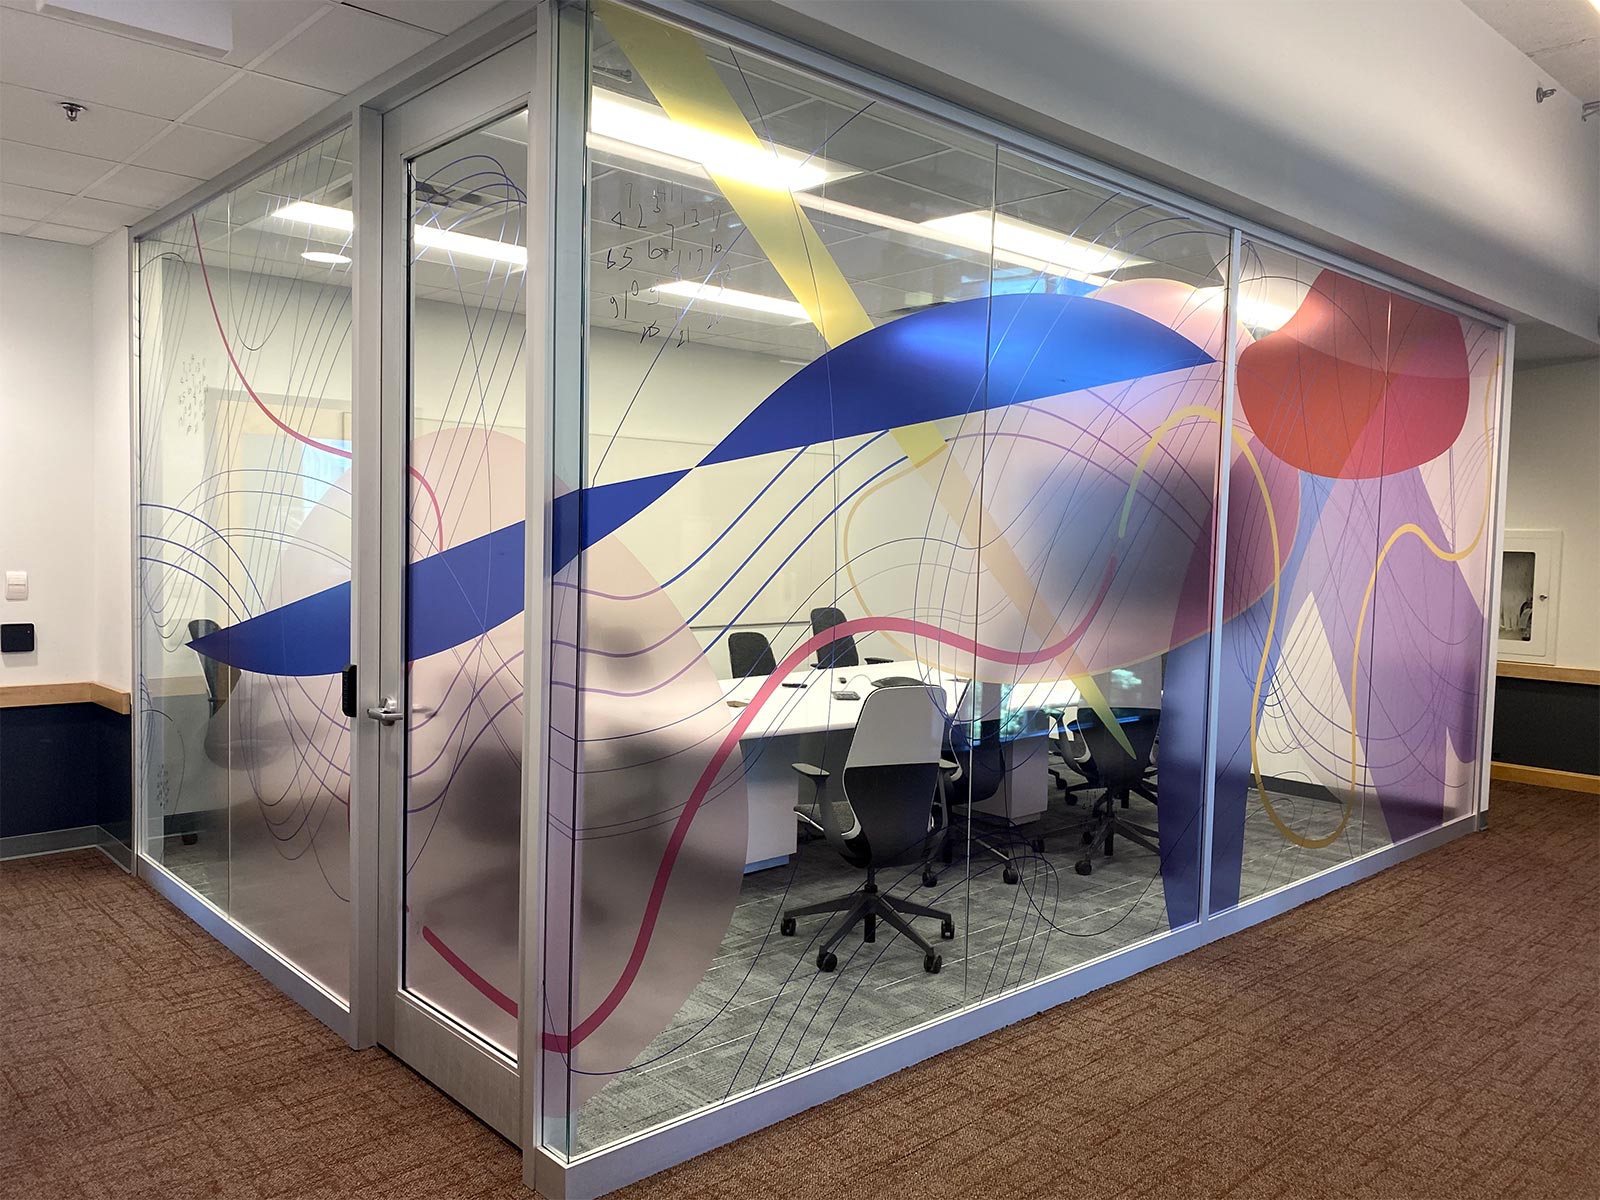 Glass panels with colourful pattern surrounding meeting area.